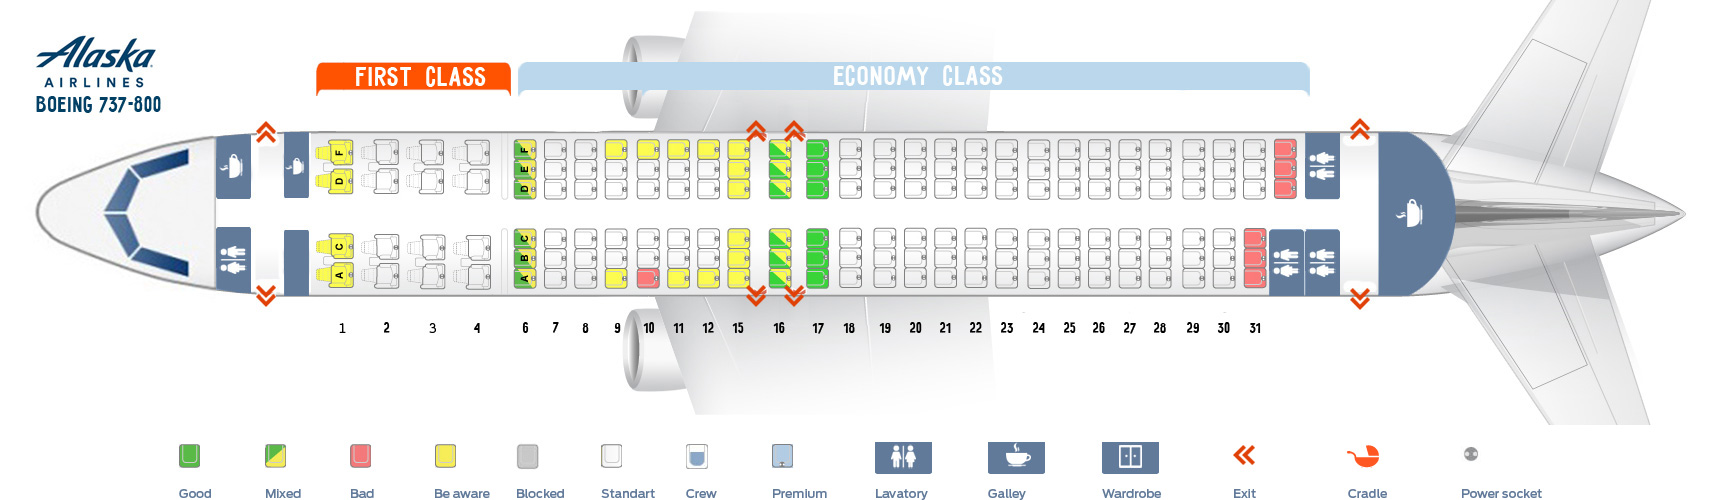 Alaska Airlines 738 Seating Chart